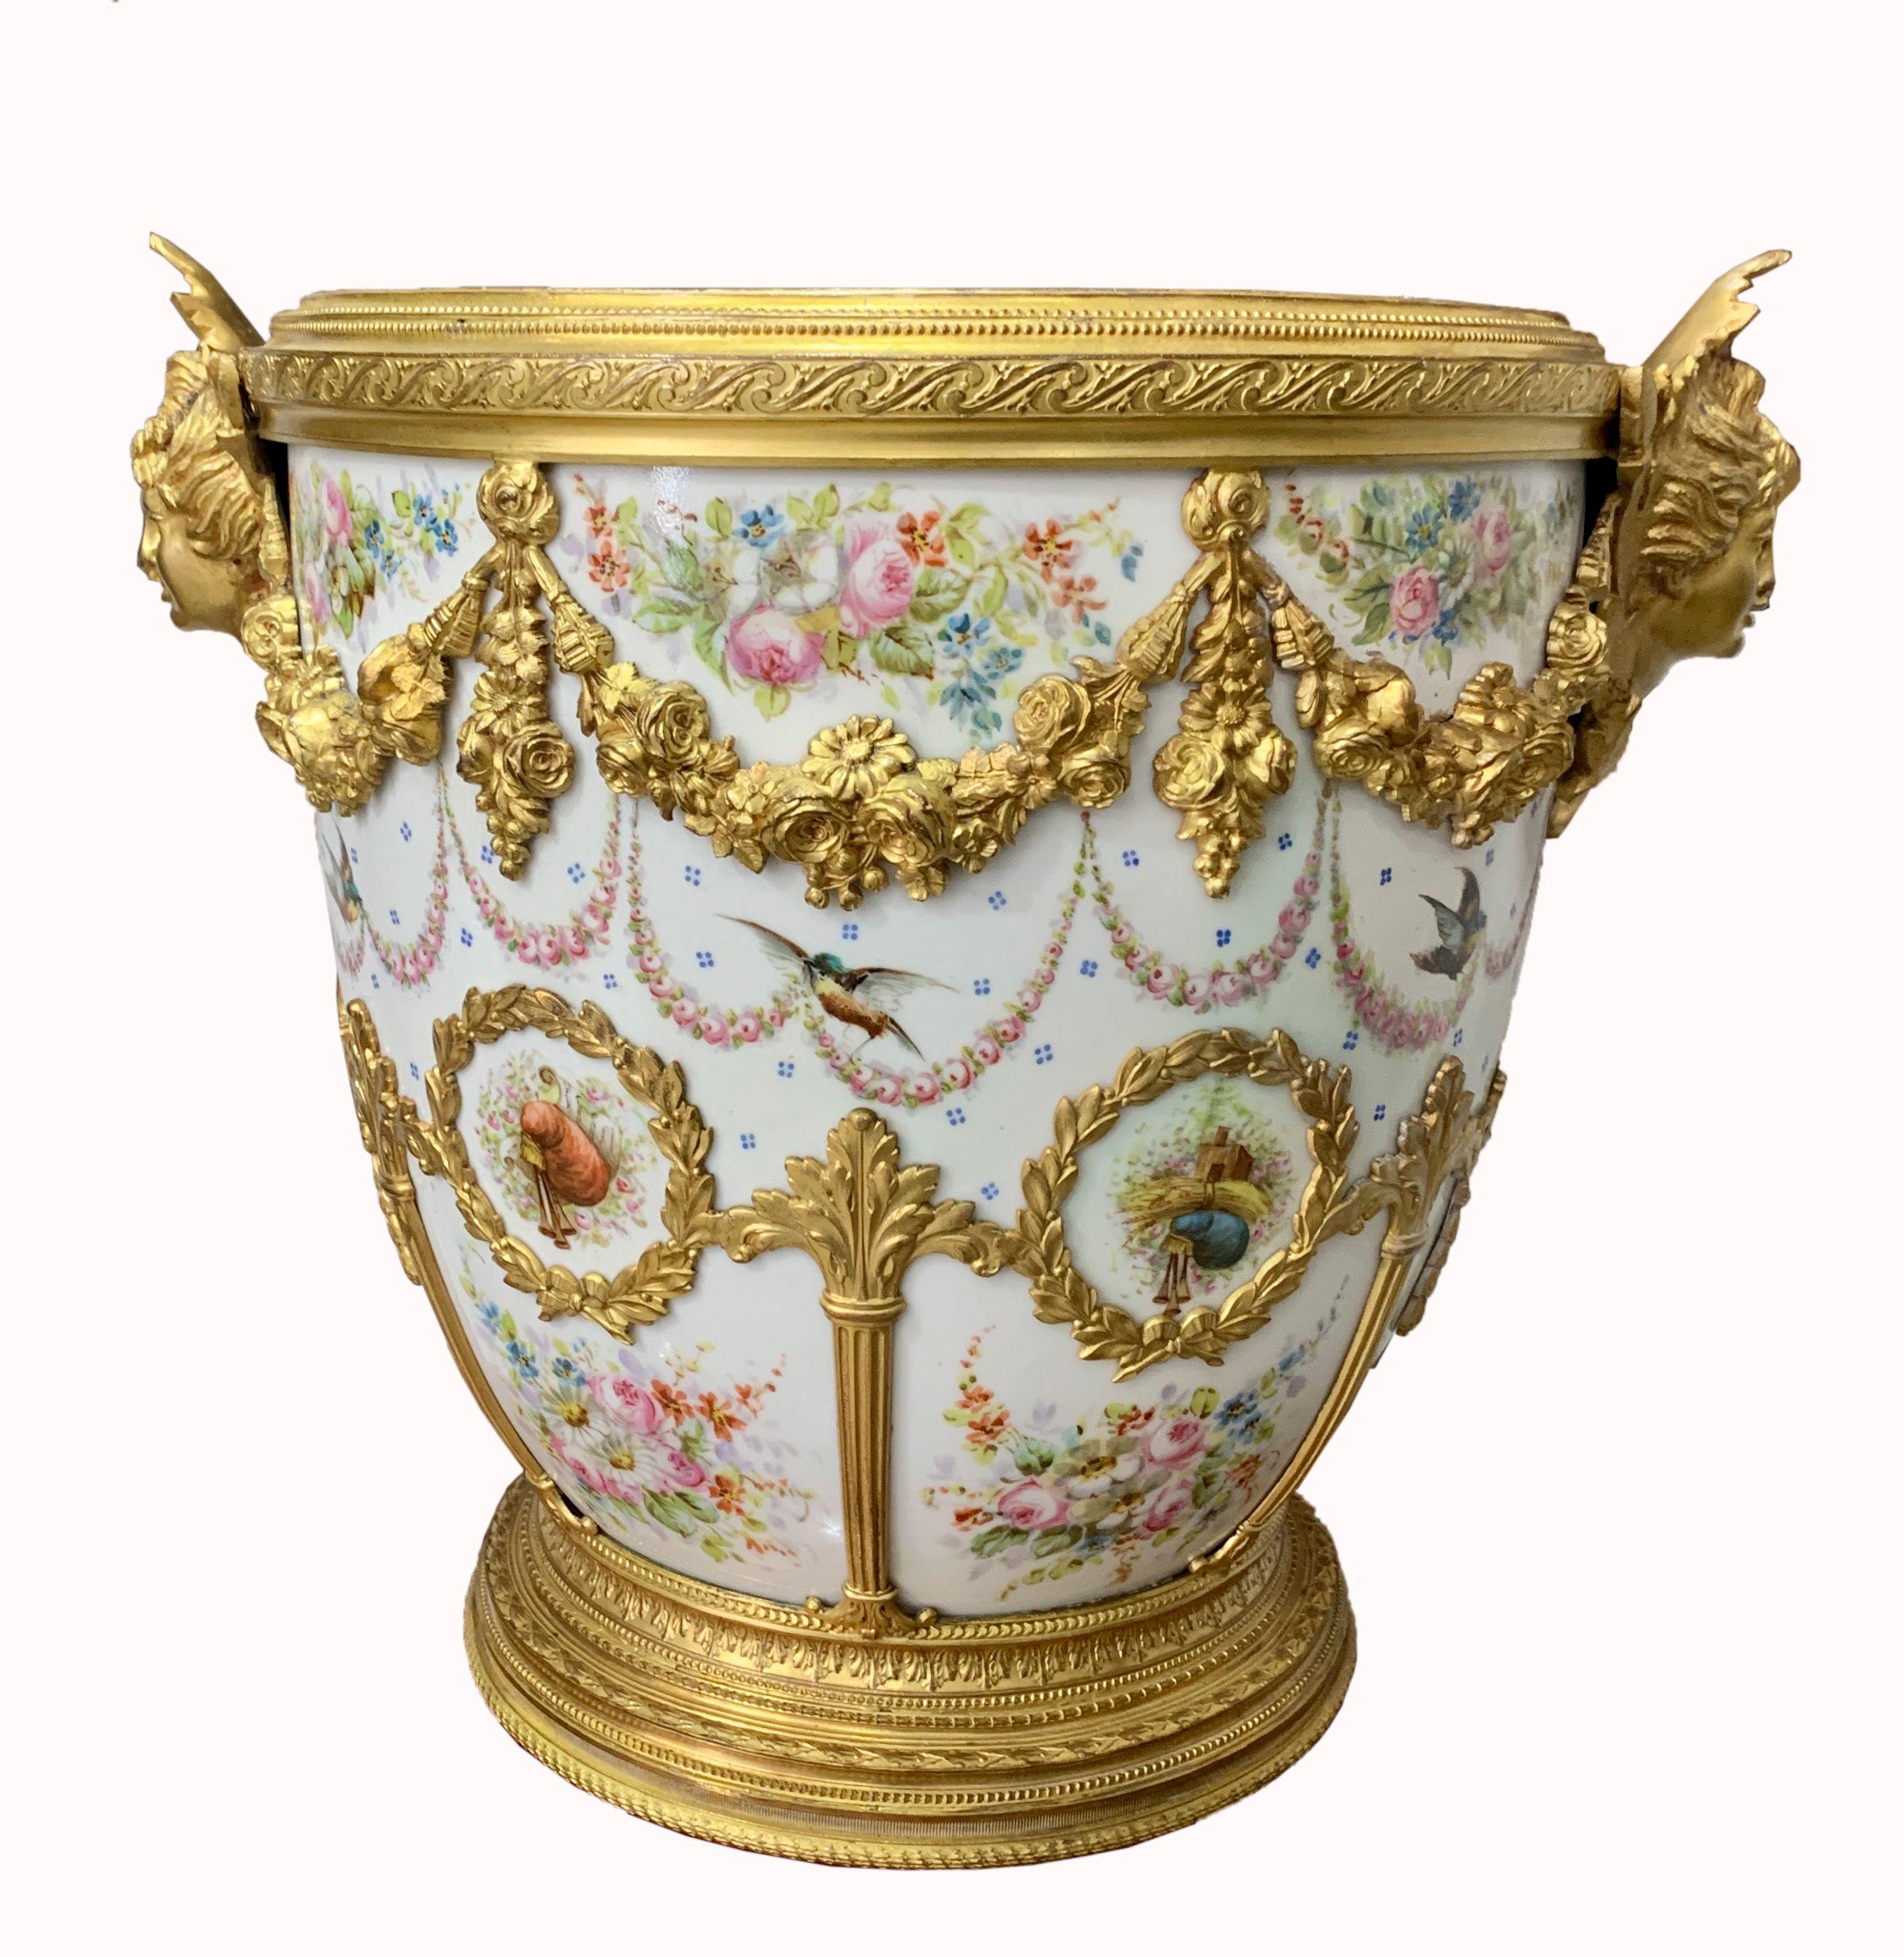 A charming and rare 19th century French 